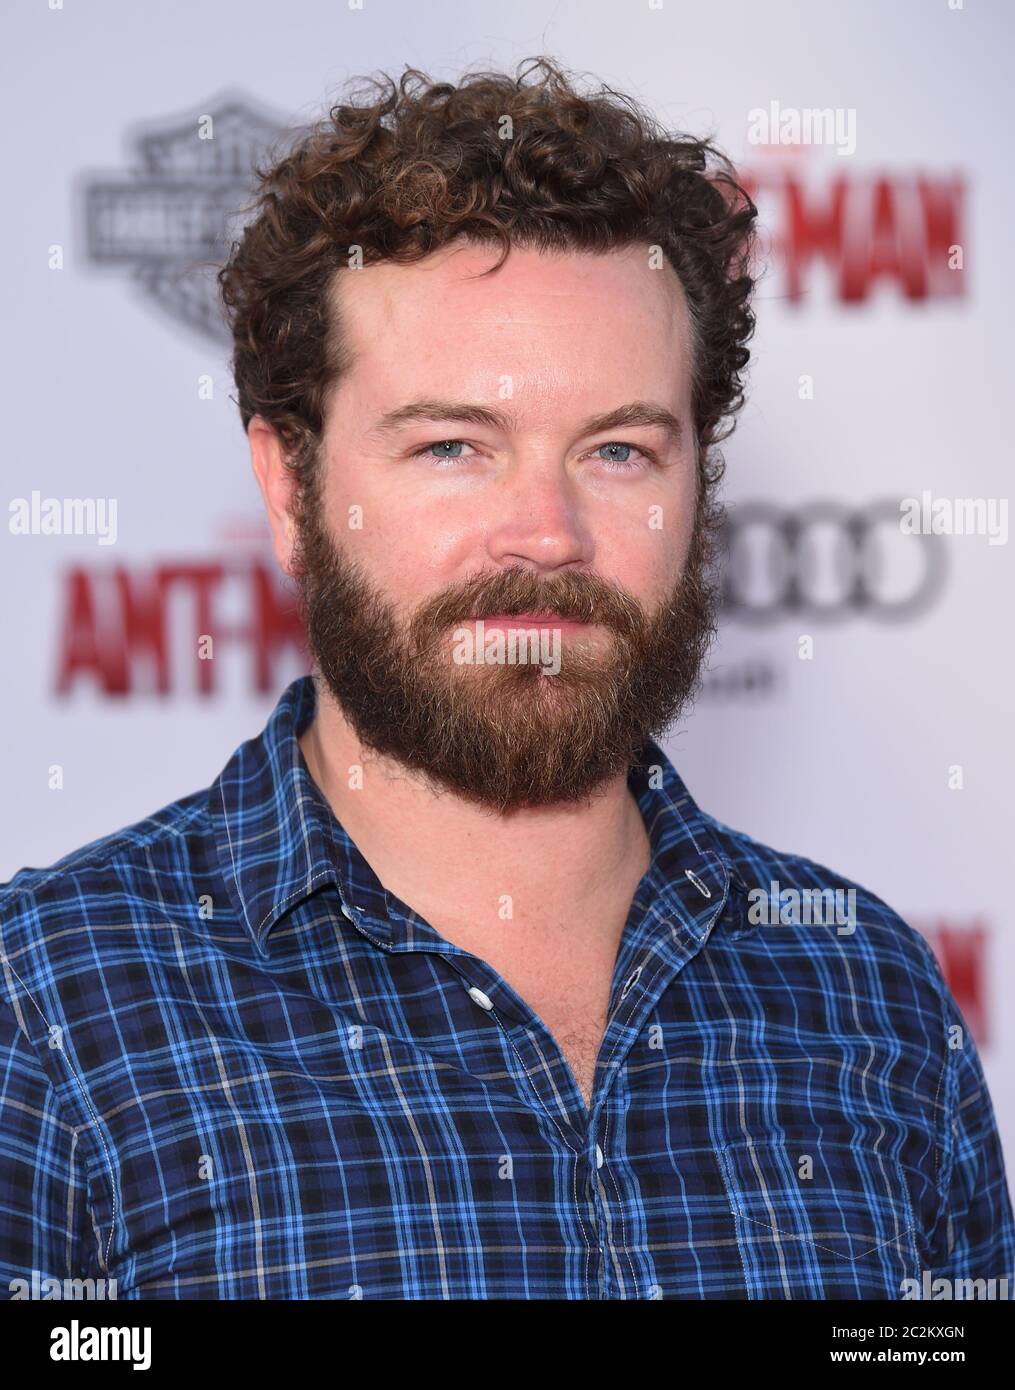 June 17, 2020, Los Angeles, California, USA: FILE PHOTO: Actor Danny Masterson, best known for 'That '70's Show' has been charged with raping three women between 2001 and 2003, the L.A. County District Attorney announced. PICTURED: June 29, 2015, Hollywood, California, USA: DANNY MASTERSON arrives for the premiere of the film 'Ant-Man' at the Dolby theater. (Credit Image: © Lisa O'Connor/ZUMA Wire) Stock Photo